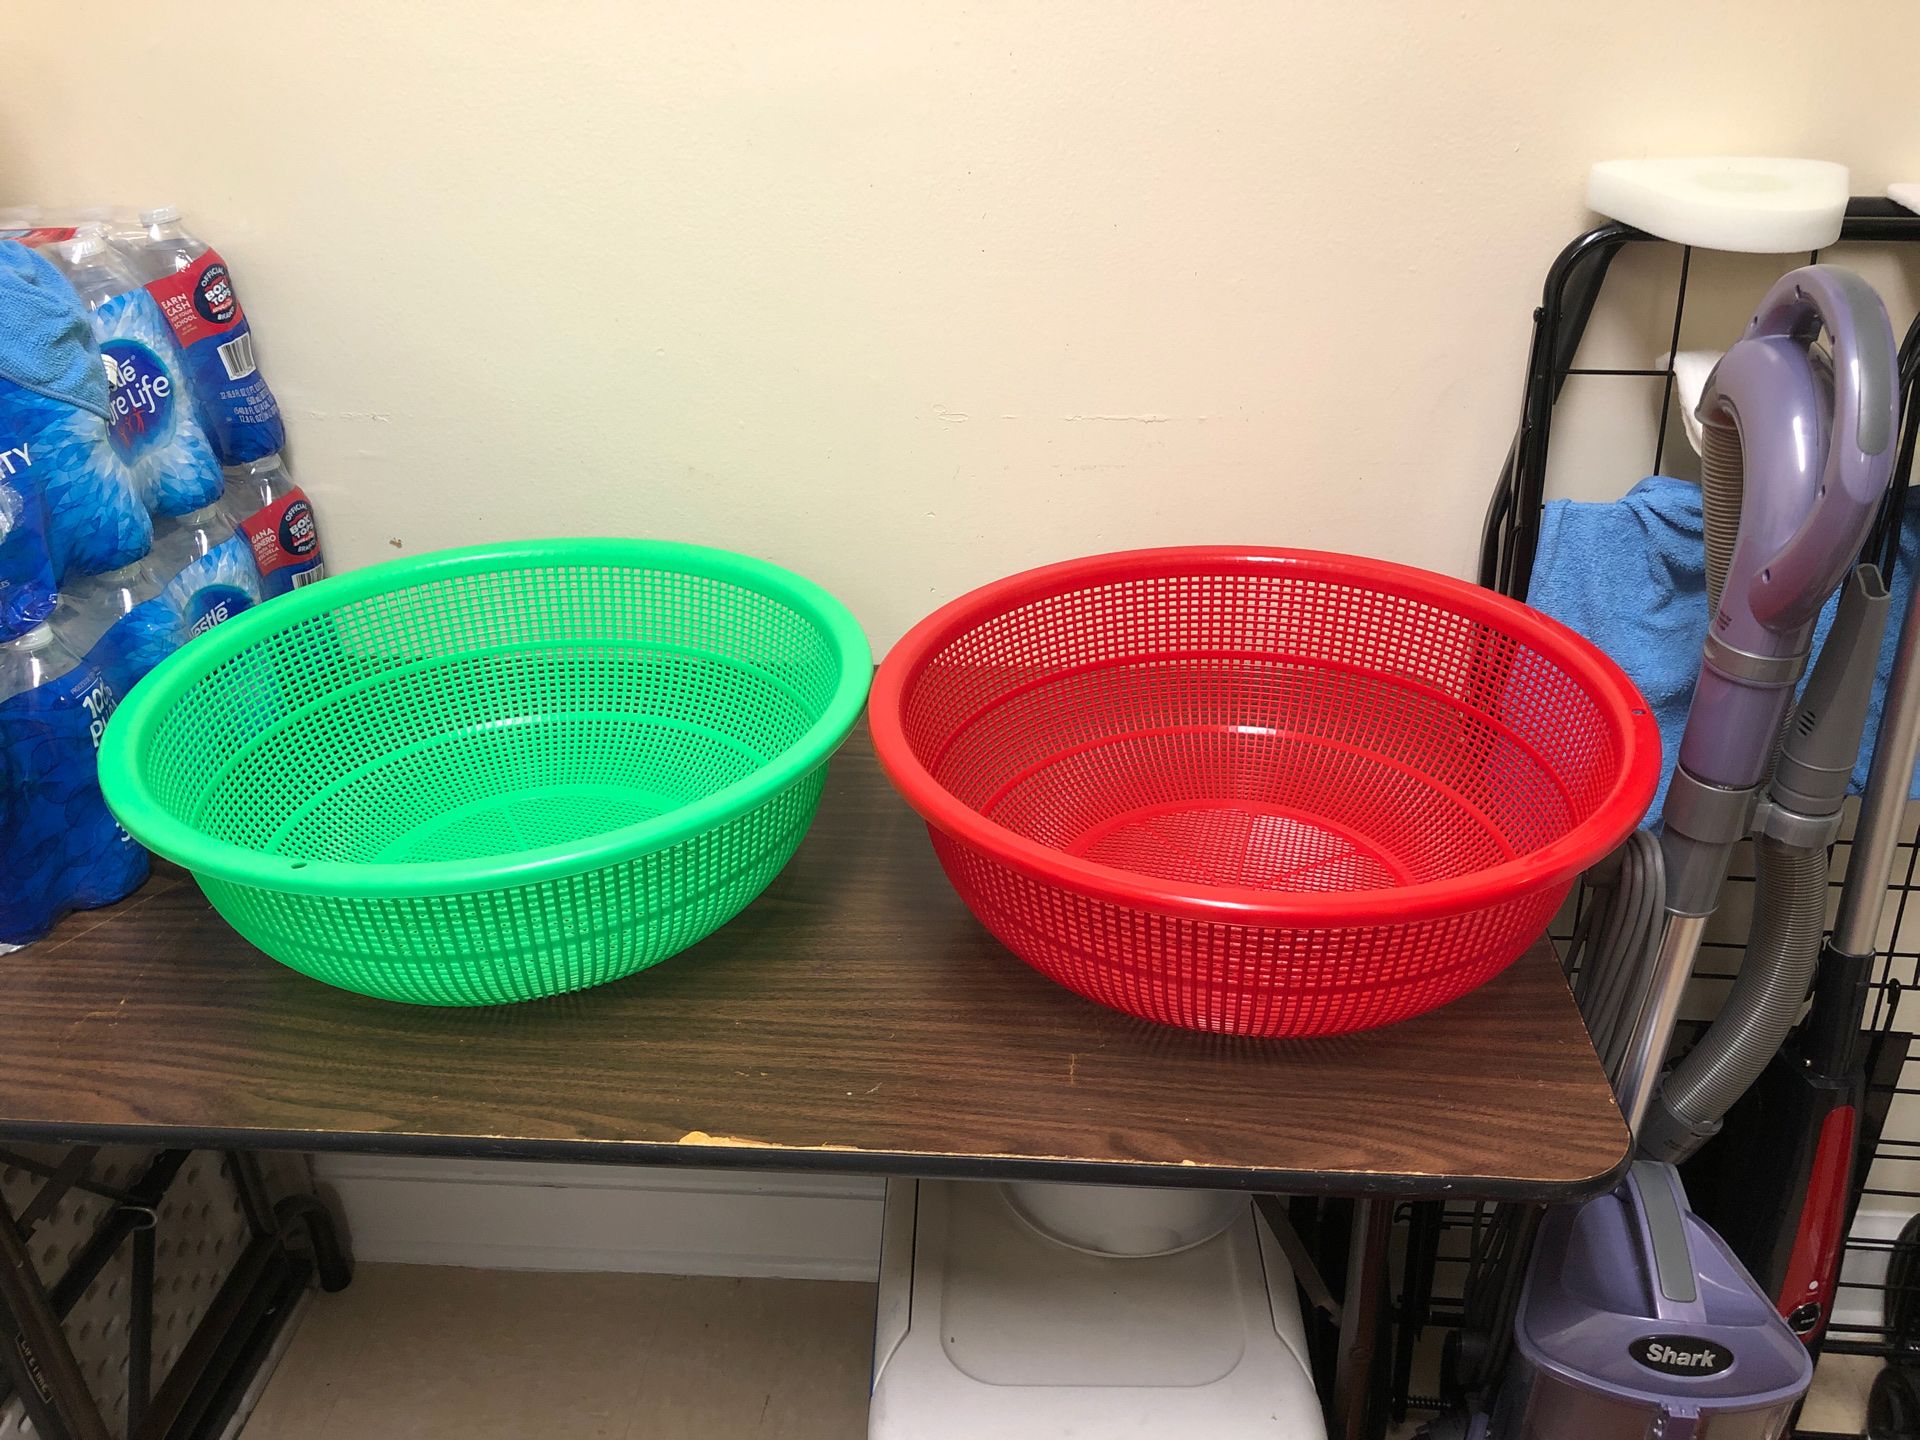 Big plastic colanders 2 for $25 or 1 for $15